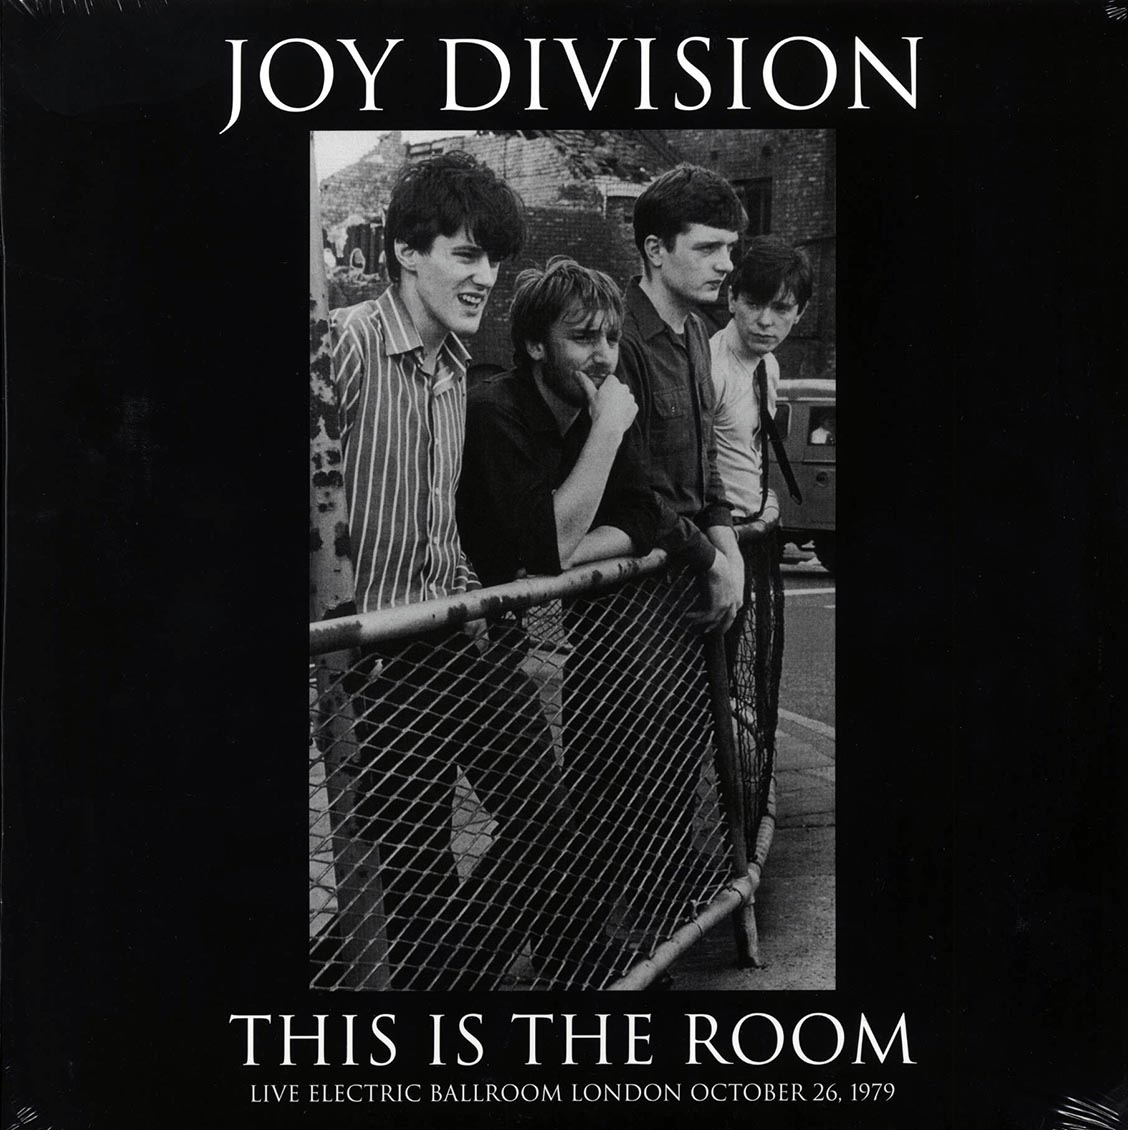 JOY DIVISION: This is the Room - Live at The Electric Ballroom, London, 10/26/1979 LP (Limited to 500 copies)